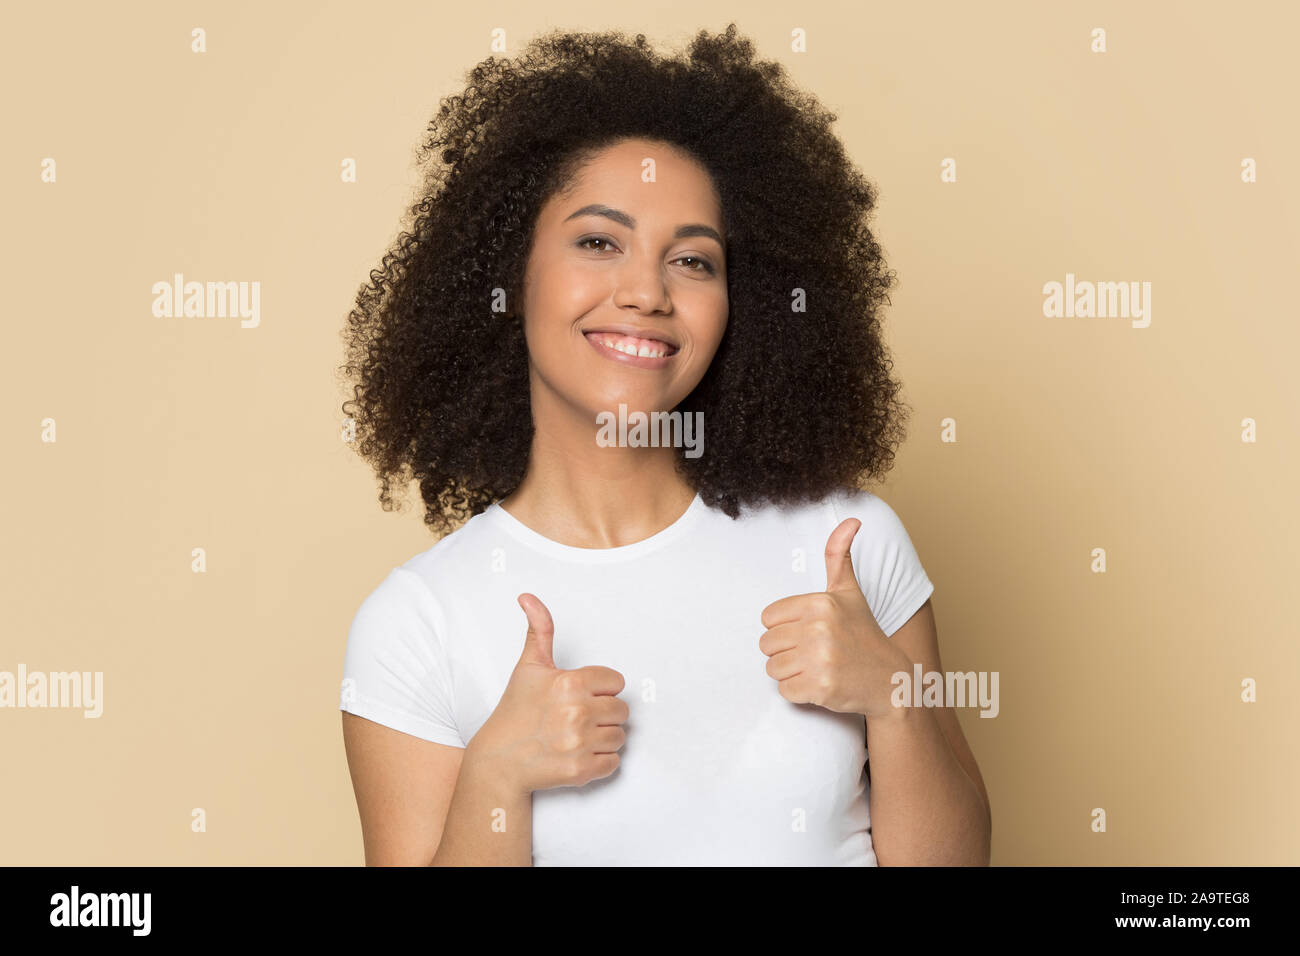 Beautiful African American girl with healthy smile showing thumbs up Stock Photo